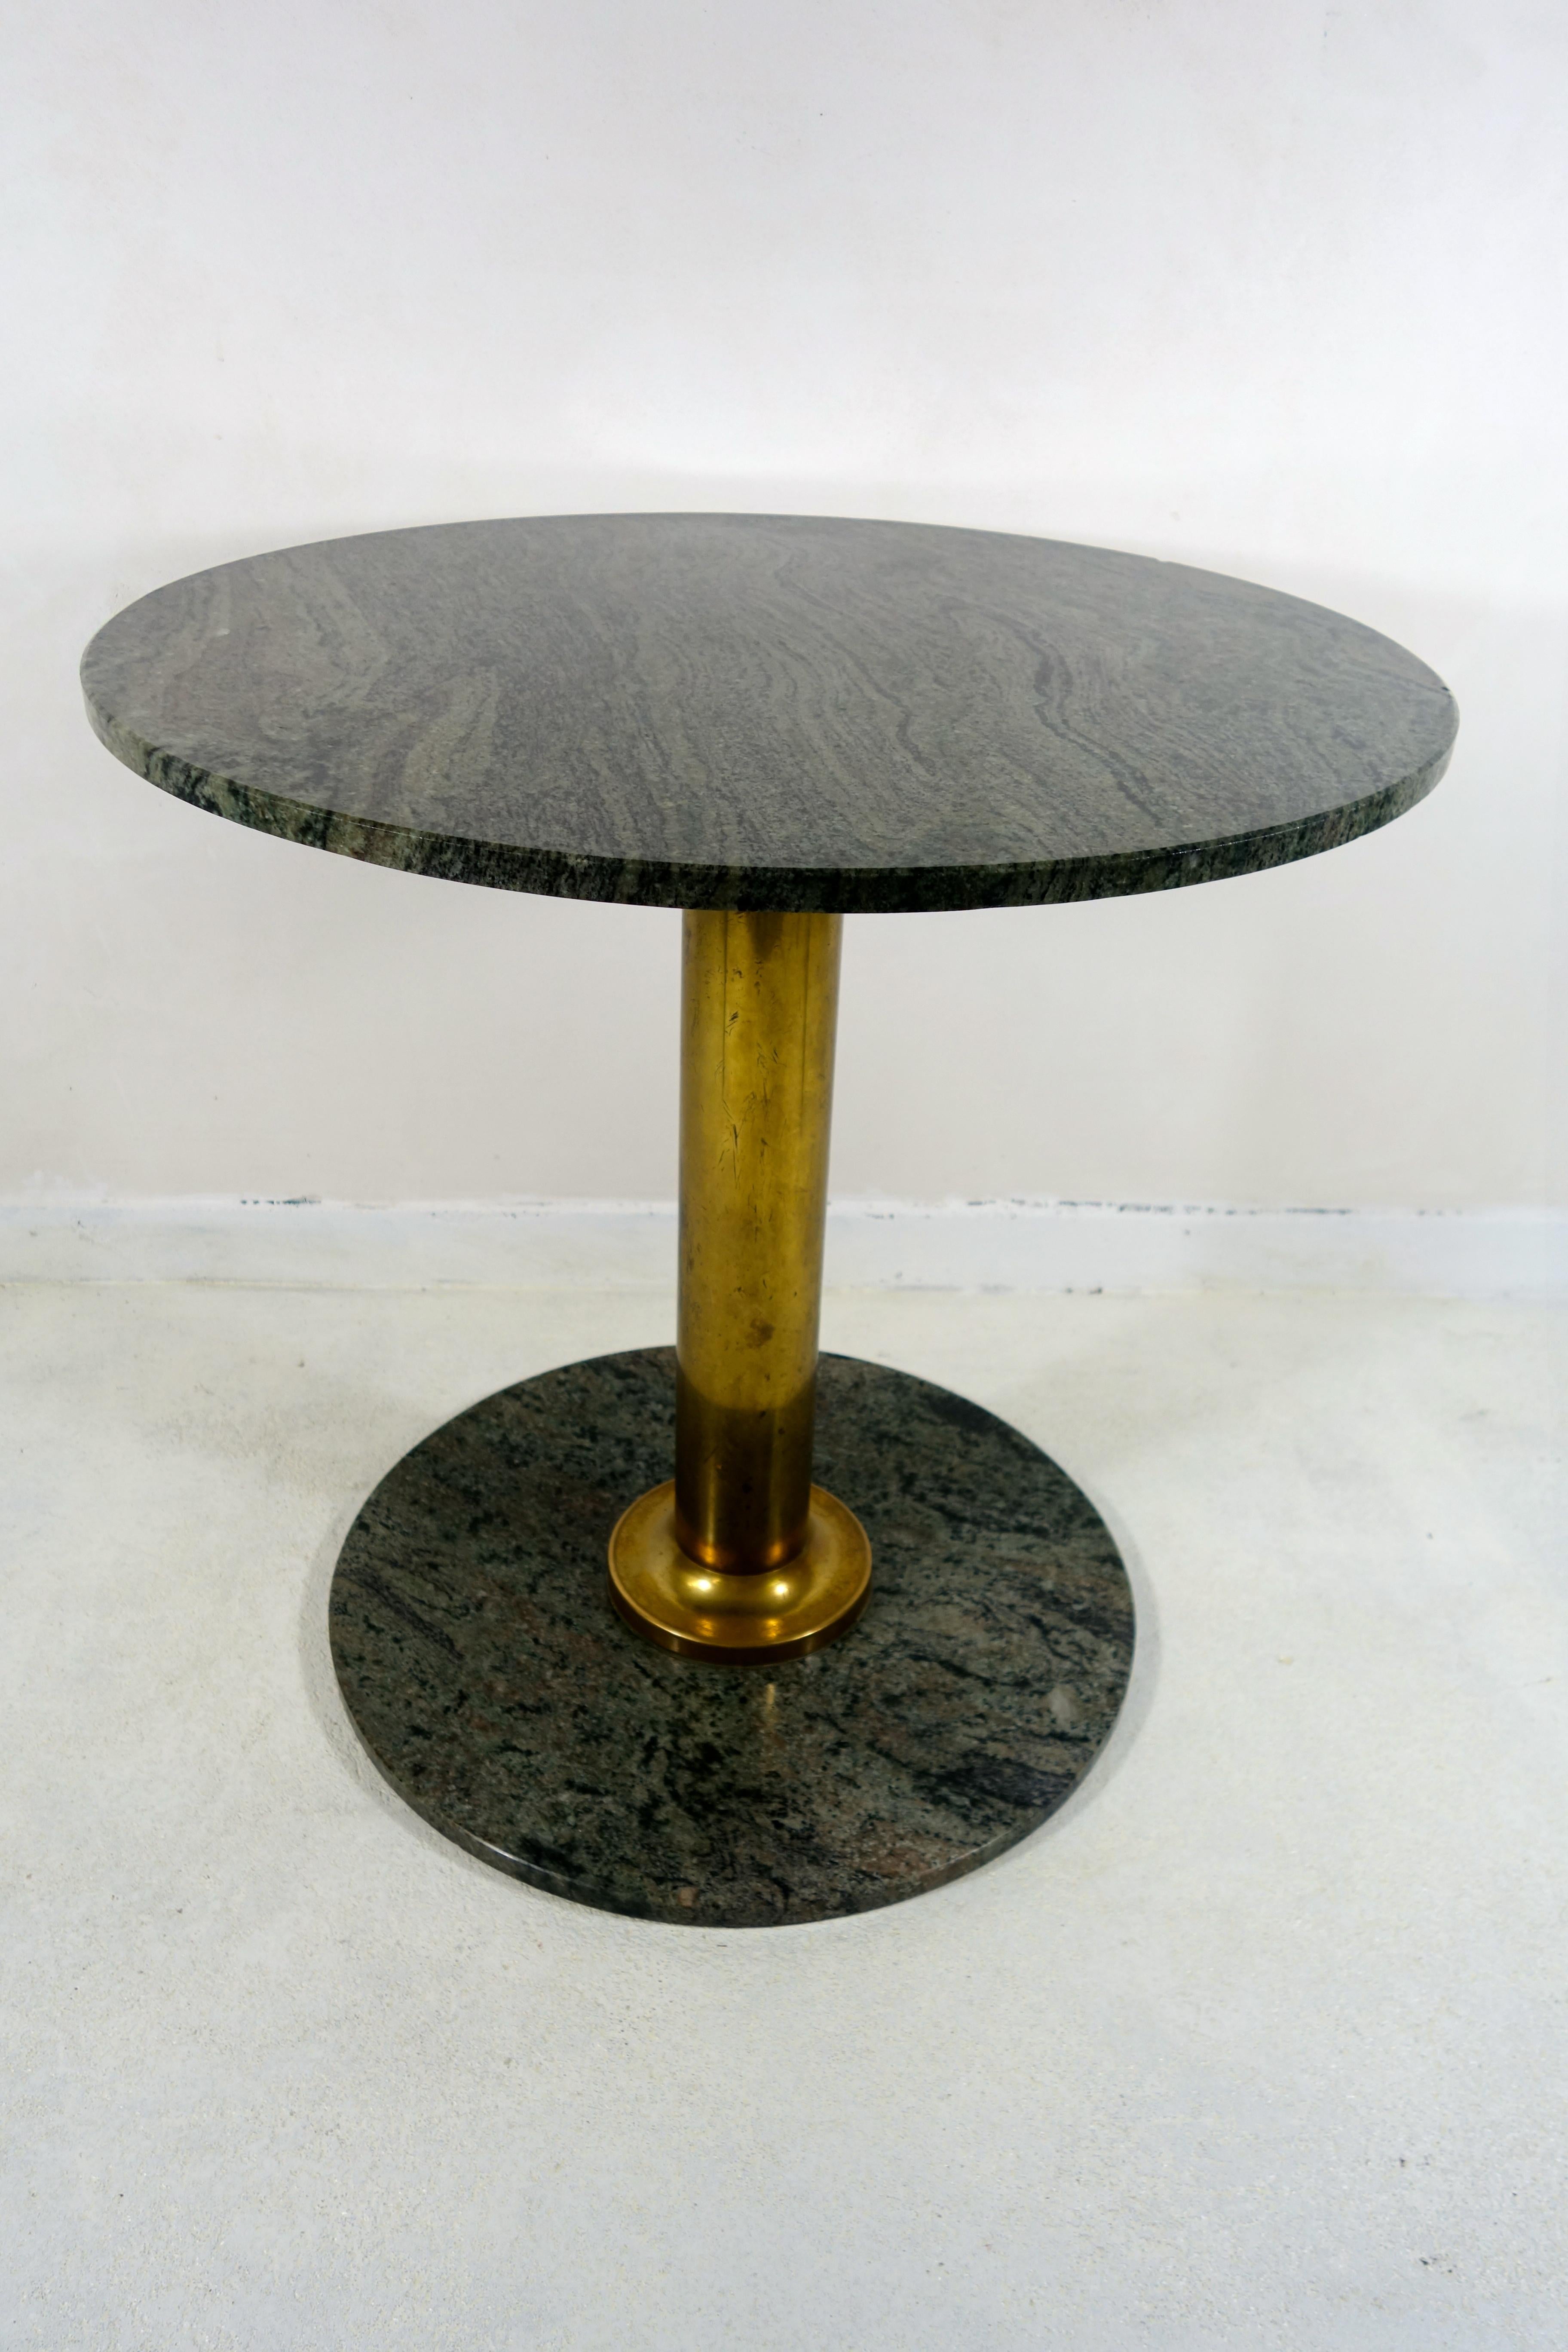 Two elegant and very heavy round tables with green granite tops and feet and brass leg.
They originate from the French restaurant Le Parc of a five star hotel in Frankfurt am Main, a restaurant that was well known for its refined kitchen and French